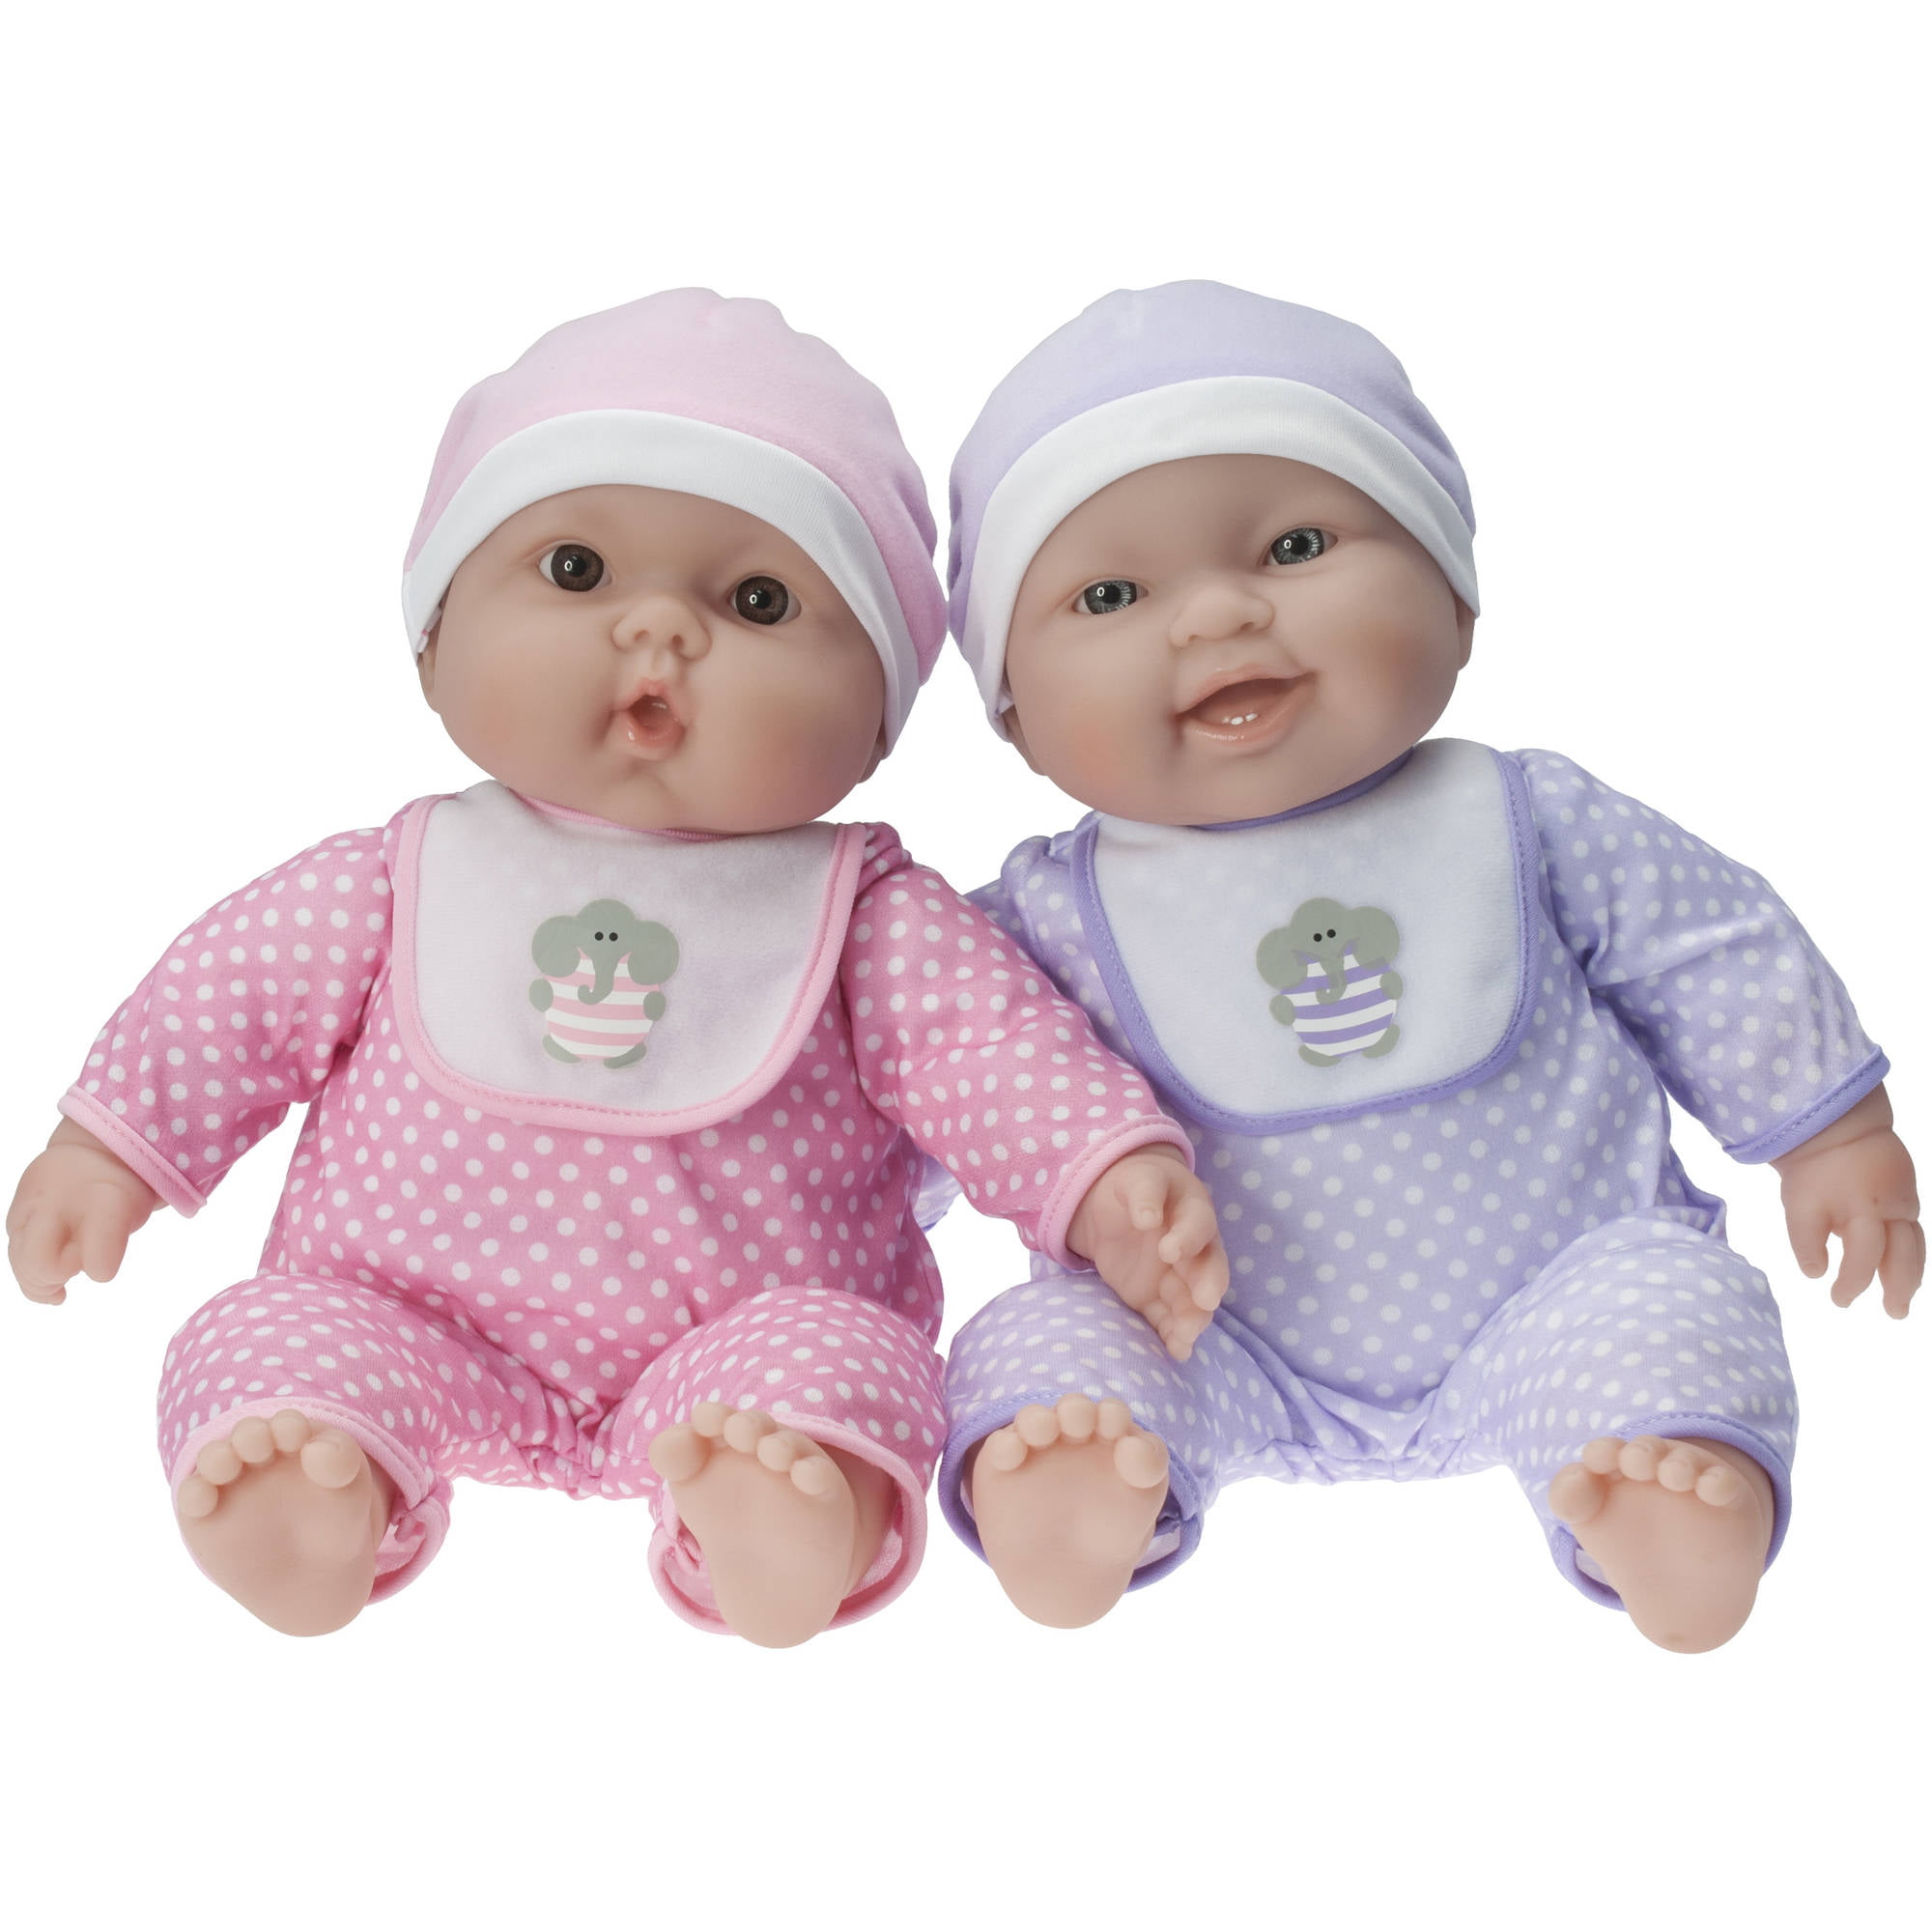 Baby Doll Carriers - Walmart.com